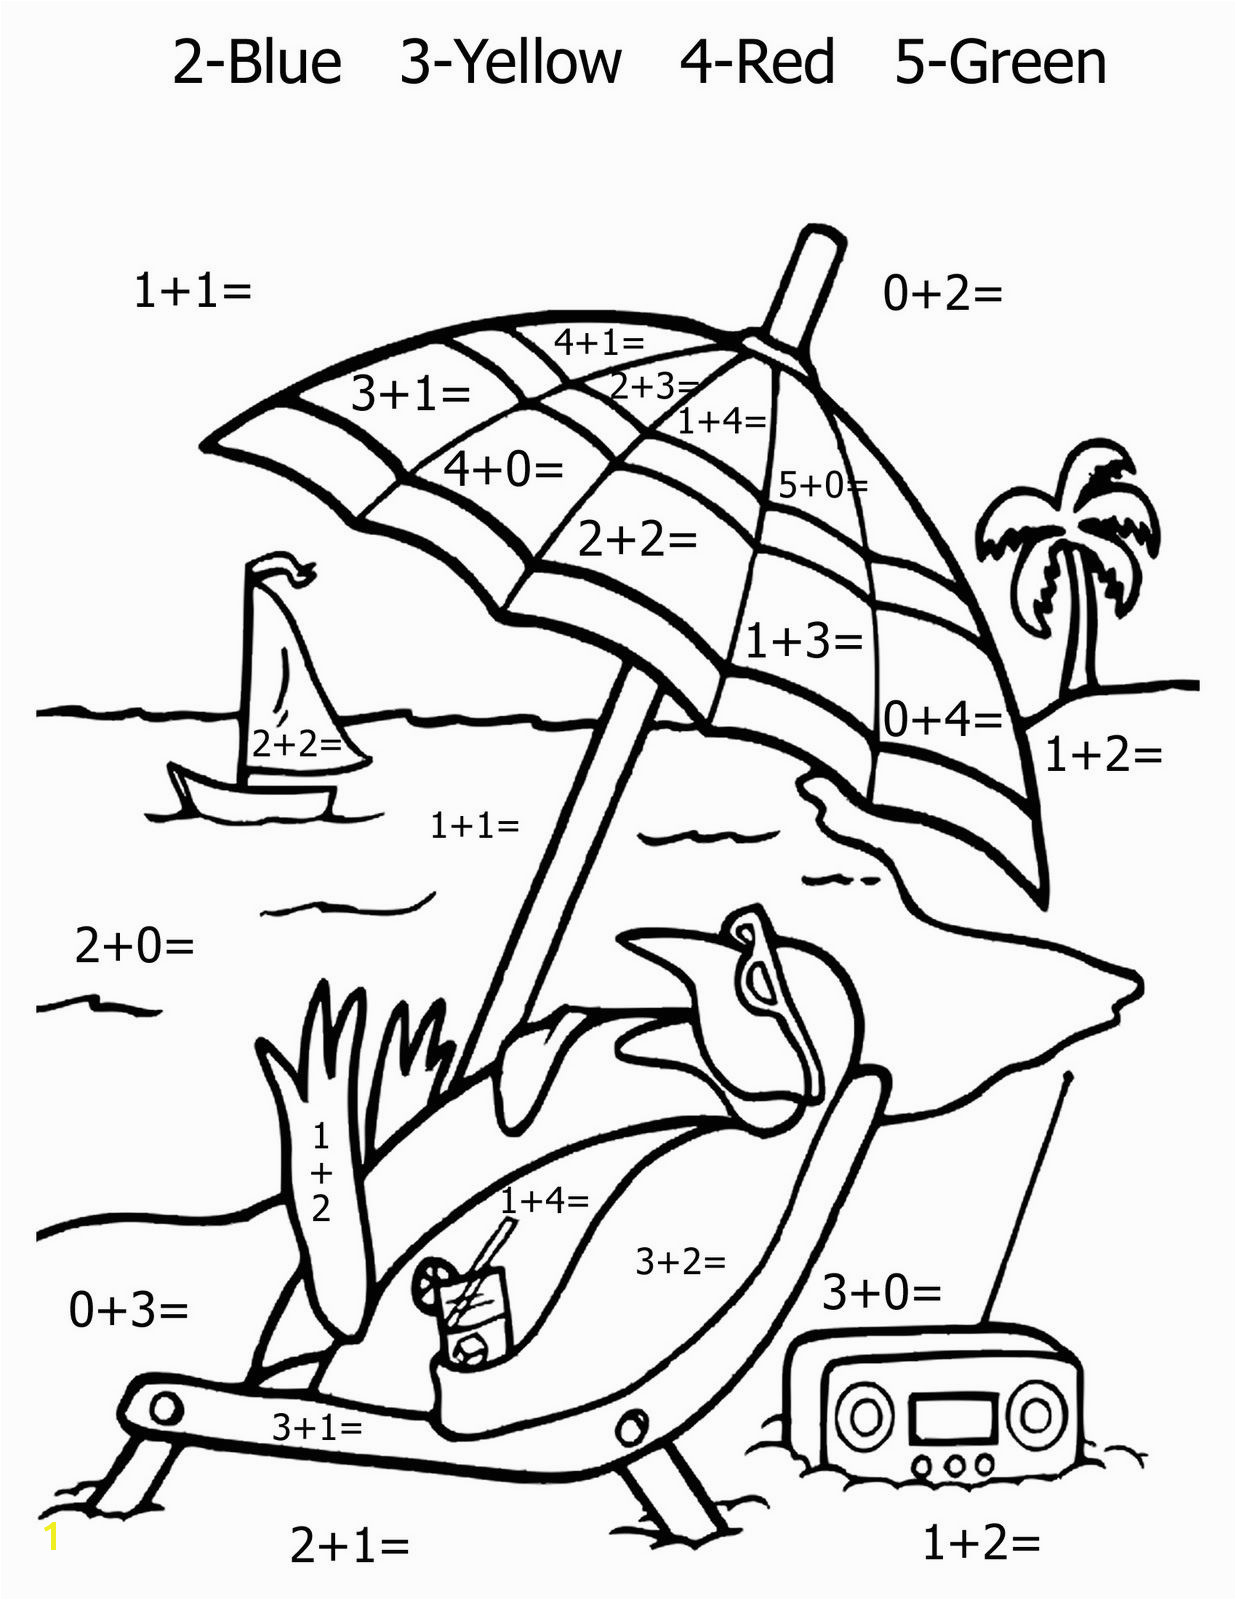 2nd Grade Coloring Pages Math May Be Plicated for some Children It S Helpful to